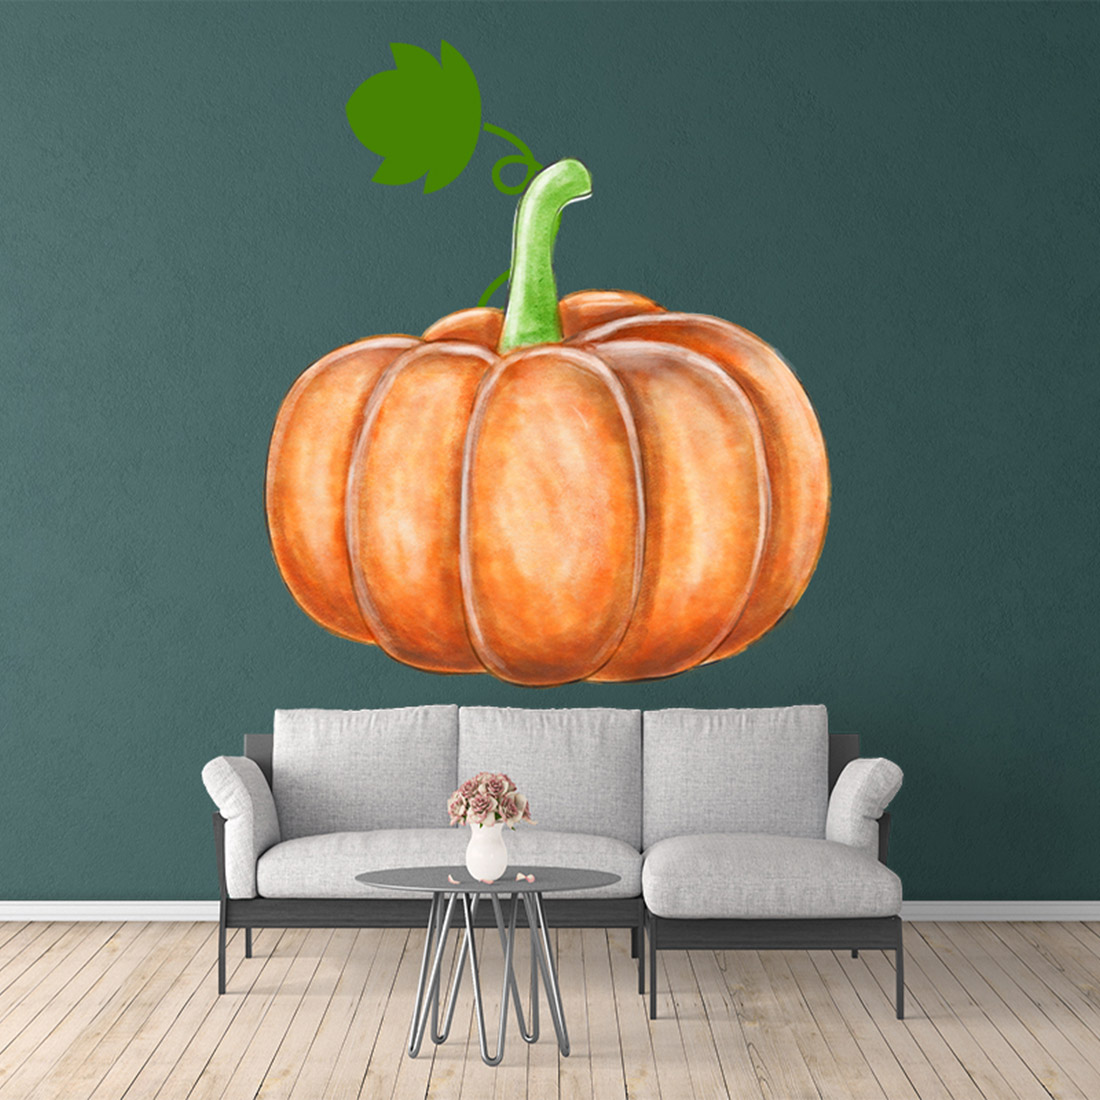 Irresistible picture of a pumpkin on the wall